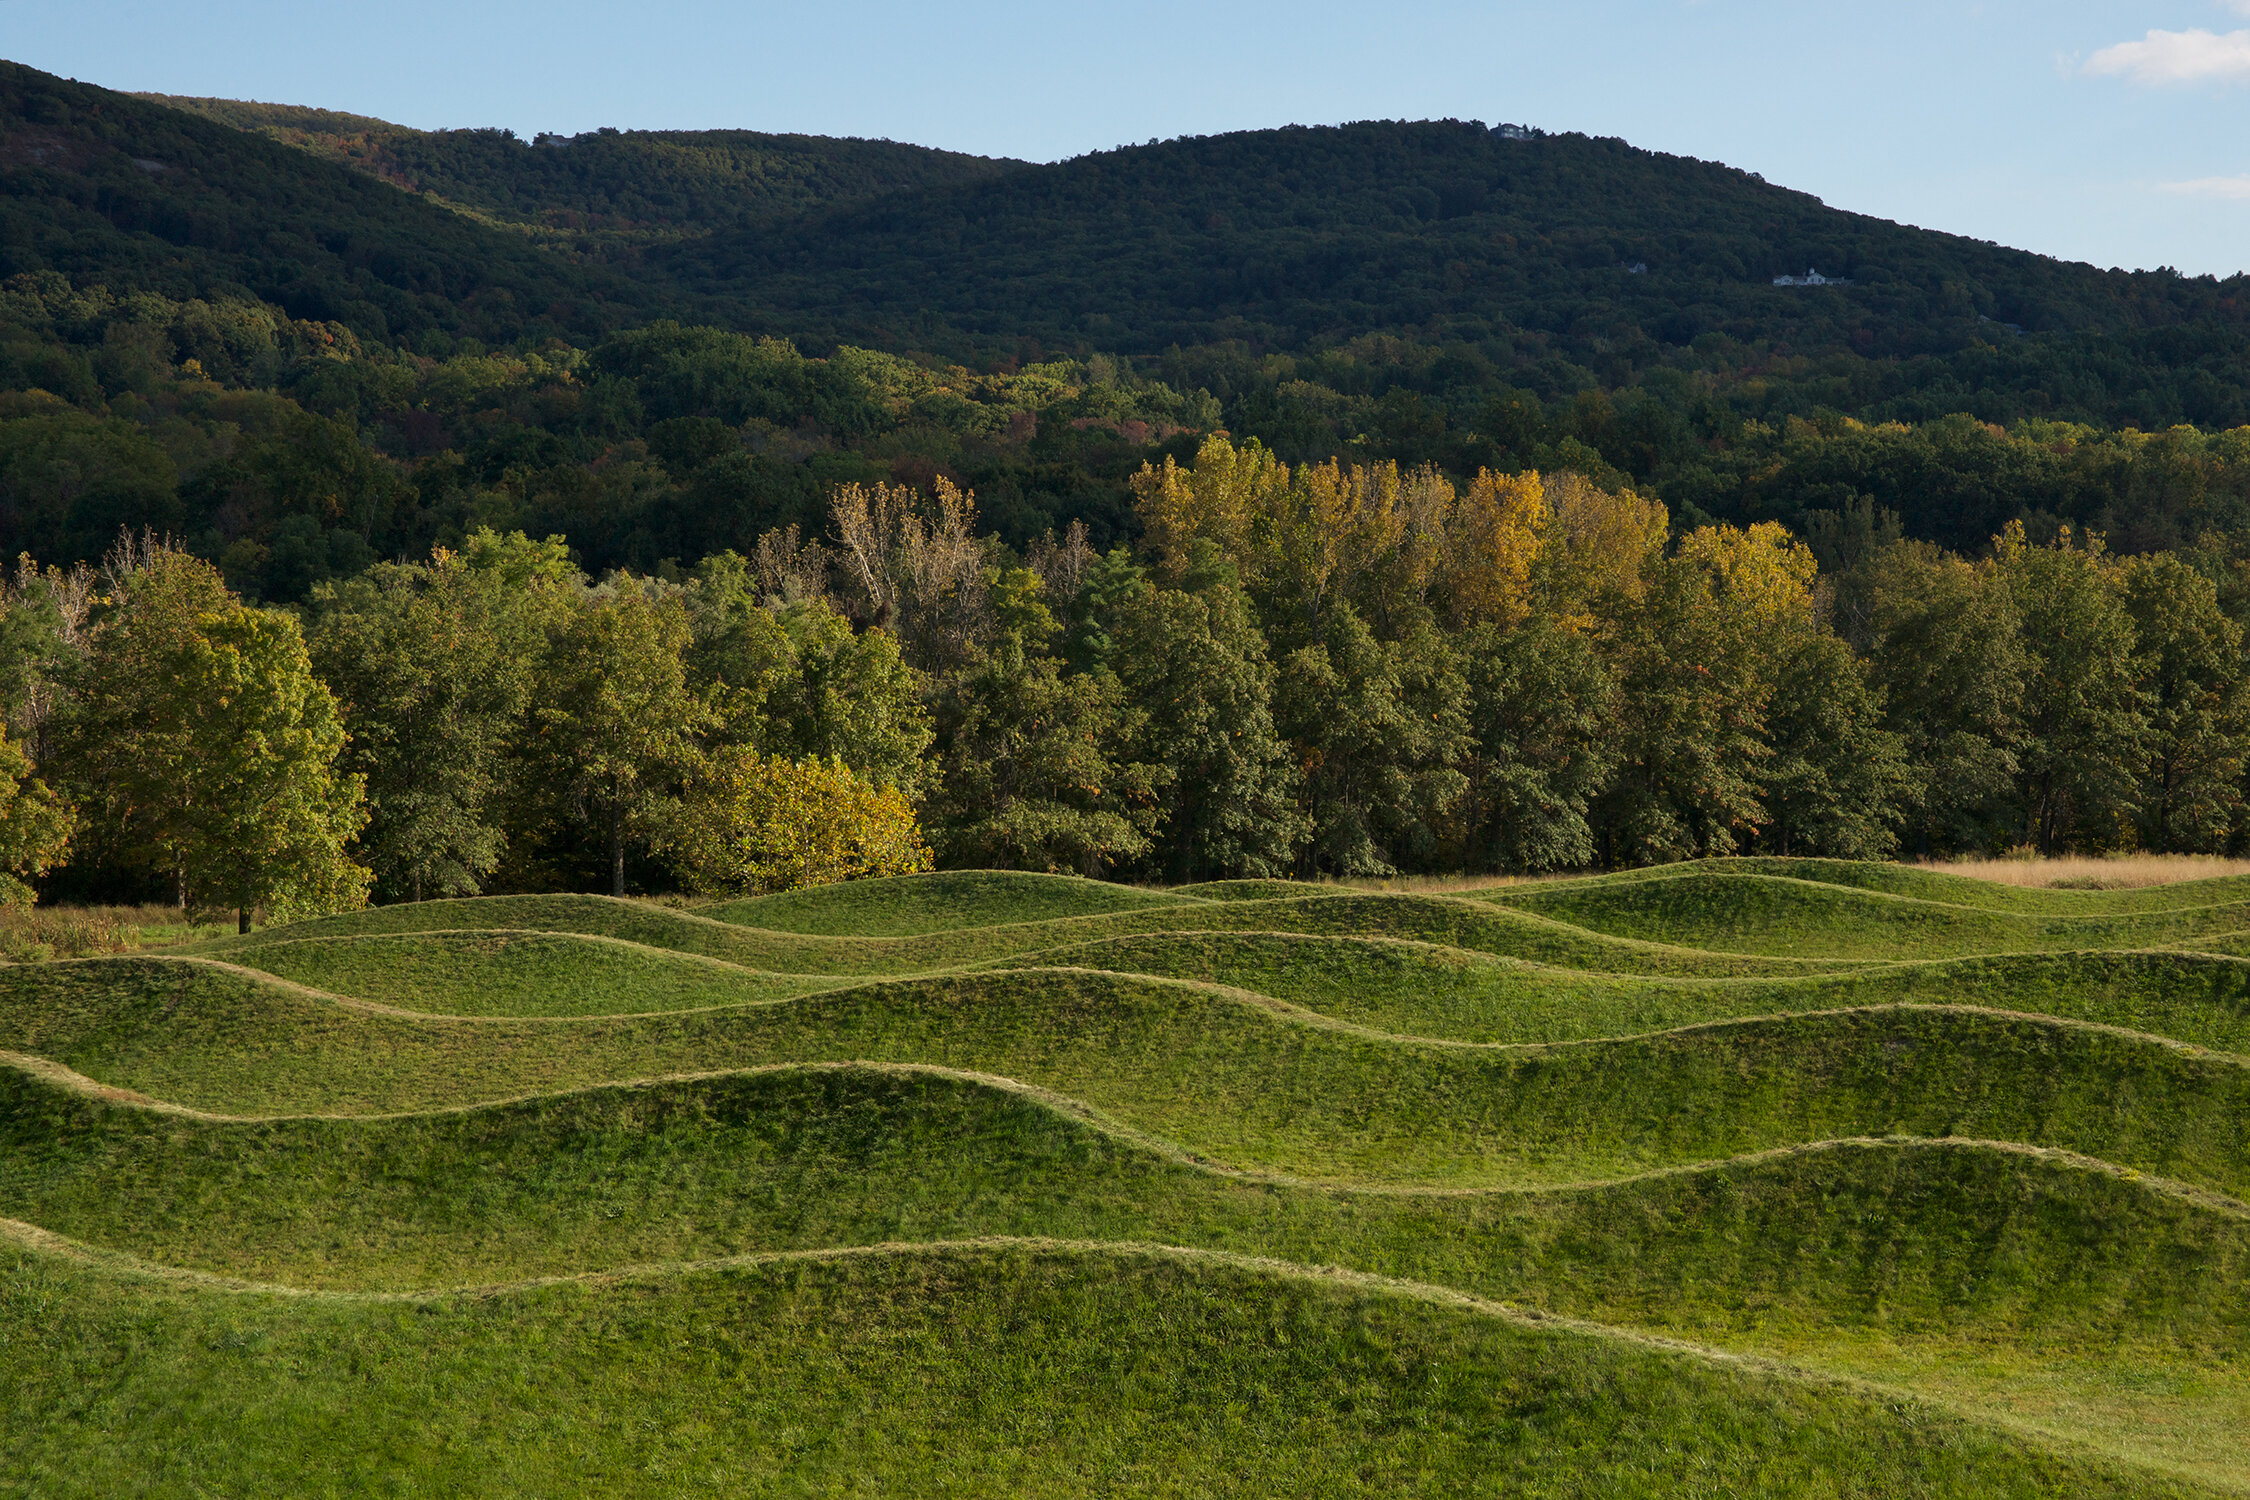 Grassy hills in the shape of waves, trees in the background.